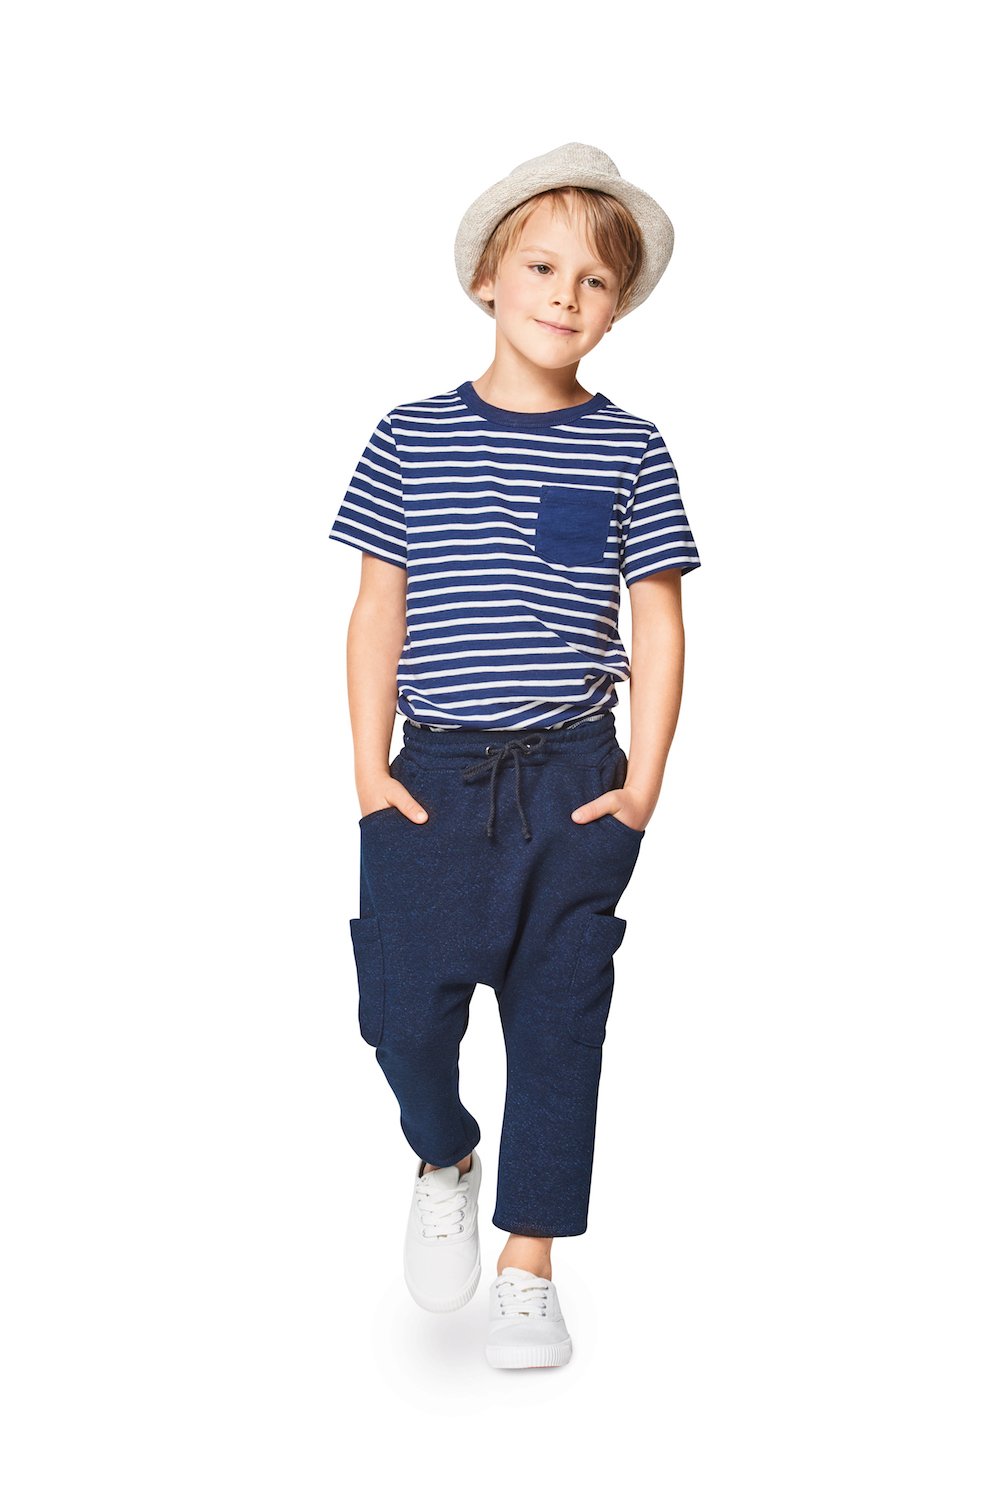 BD9342 Child's Elastic Waistband Trousers from Jaycotts Sewing Supplies